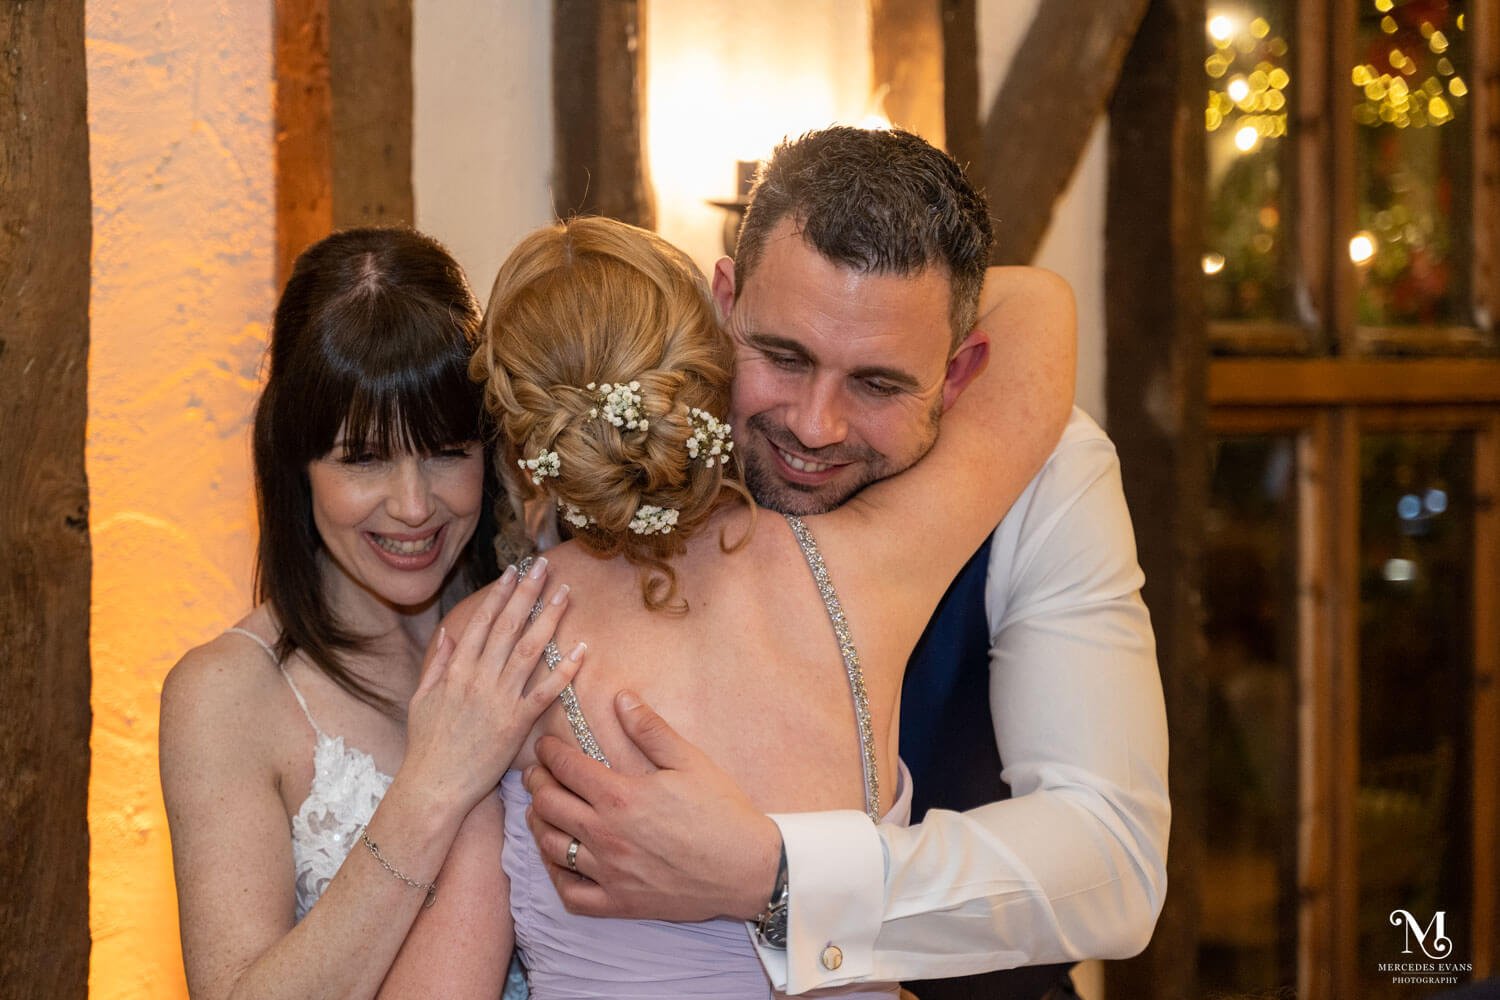 the bride and groom both hug the maid of honour during the evening reception